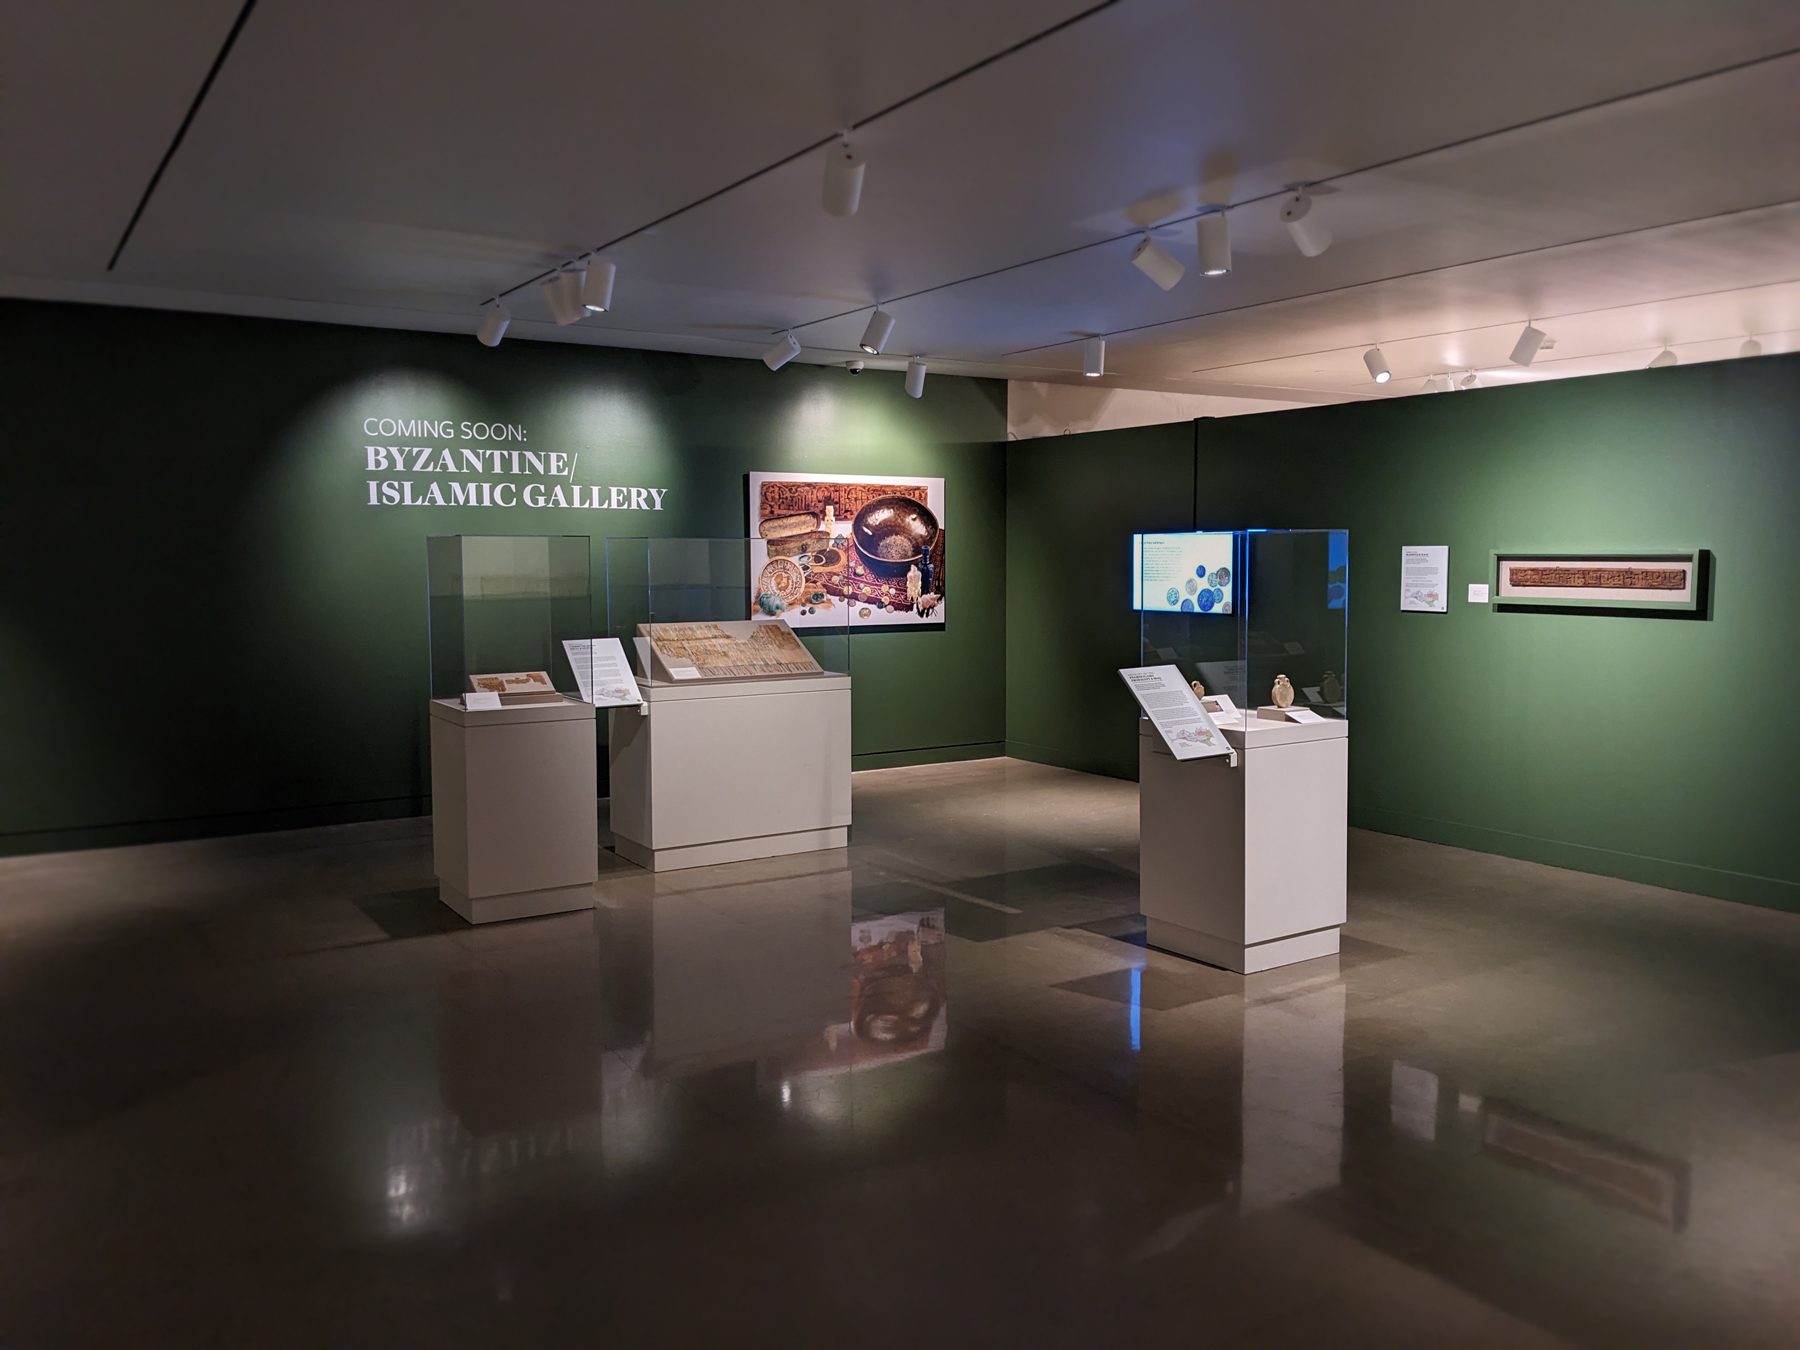 Museum gallery space with three vitrines containing textiles and ceramic artifacts. The walls are painted green and hold a photo of Byzantine and Islamic artifacts, a TV screen with a slideshow, and a mounted wooden door lintel. Text on the wall reads, “Coming Soon: Byzantine/Islamic Gallery.”